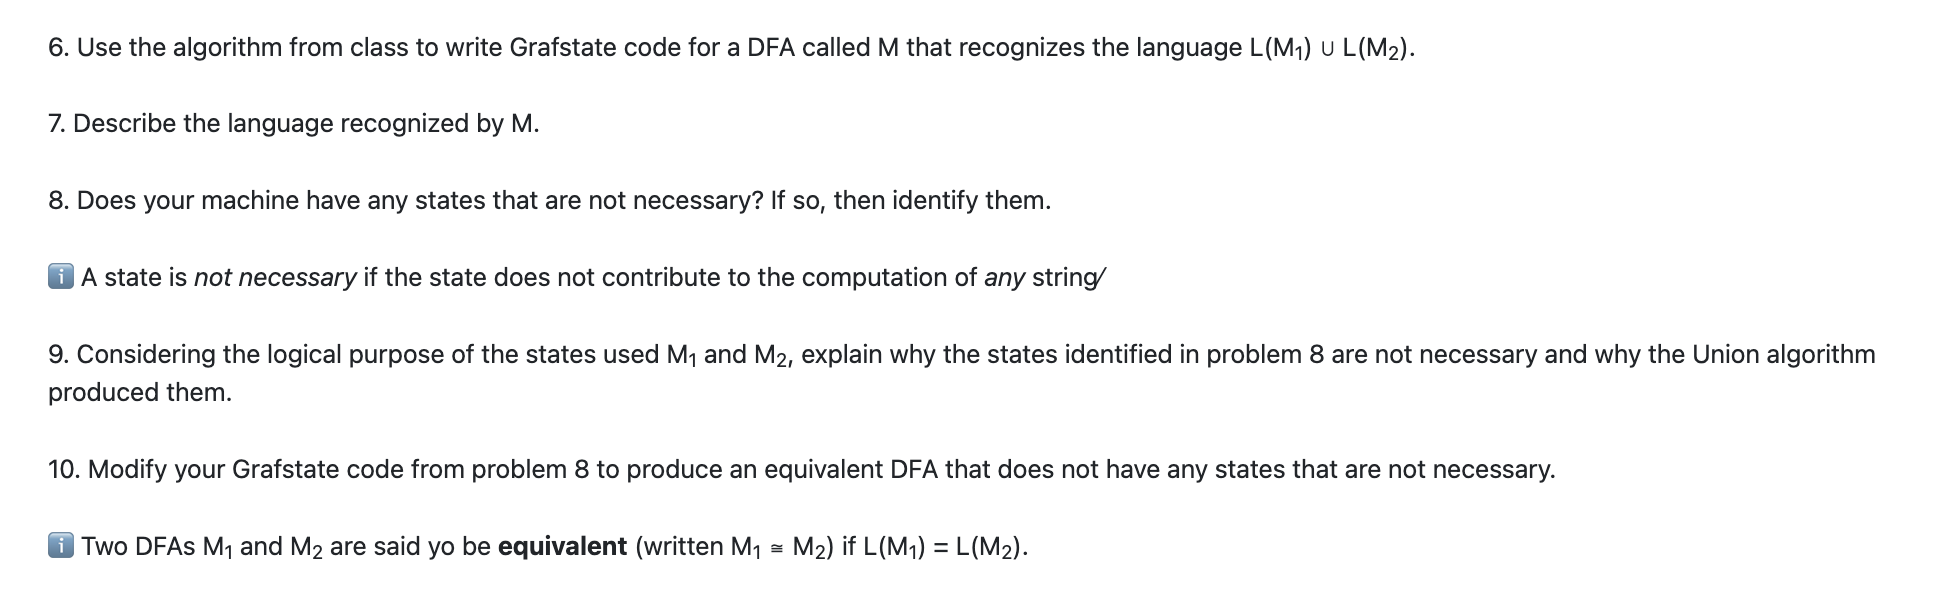 6. Use the algorithm from class to write Grafstate code for a DFA called \( M \) that recognizes the language \( L\left(M_{1}